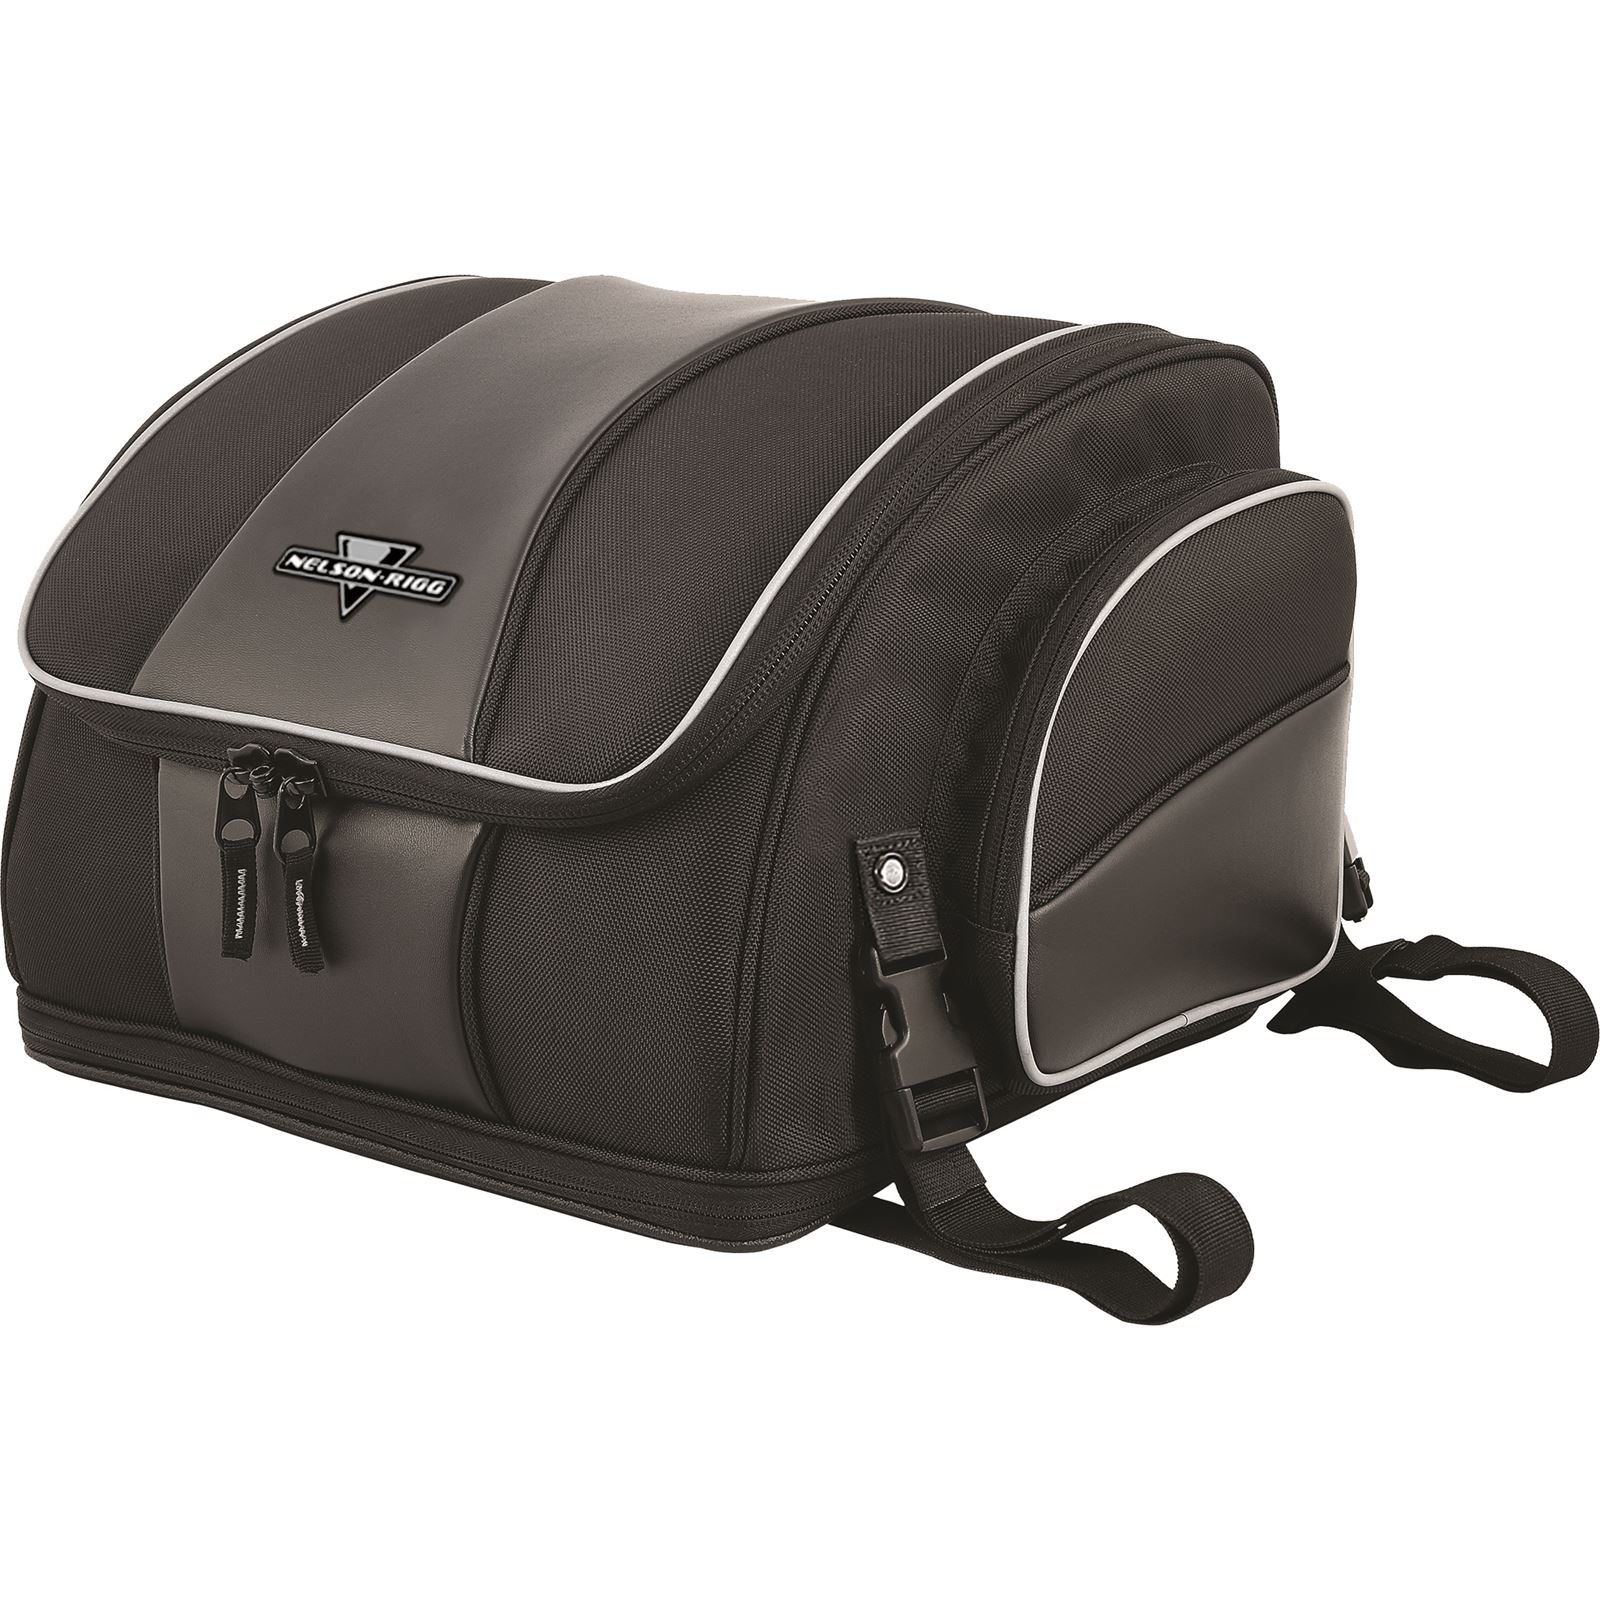 Nelson-Rigg Route 1 Weekender NR-215 Bag